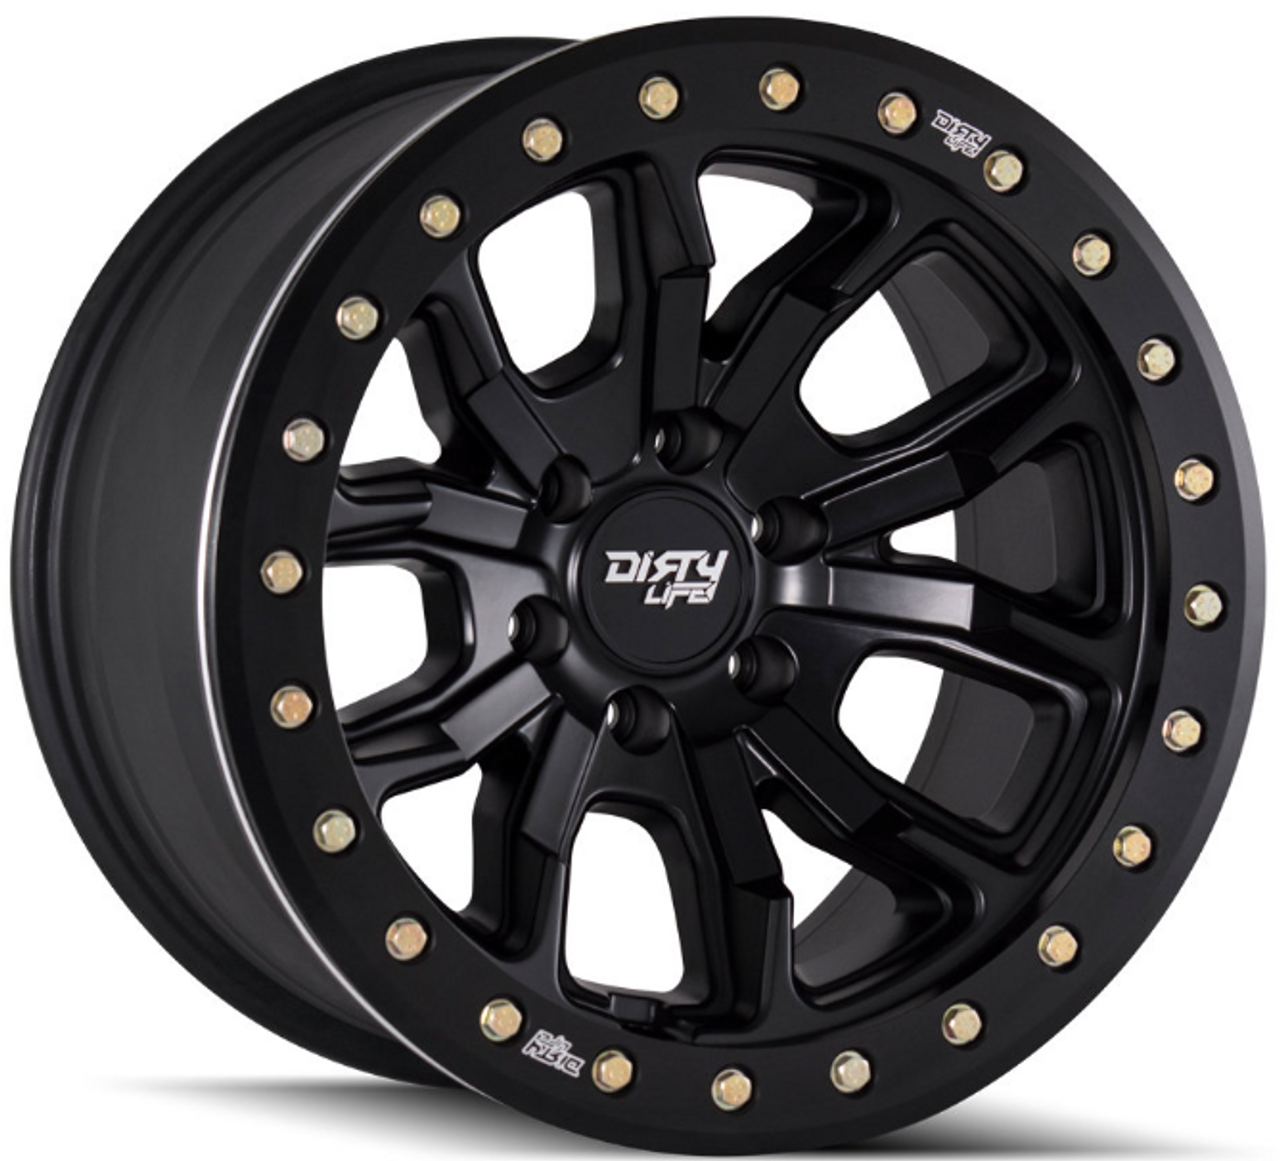 Dirty Life 9303-7973MB12 DT-1 9303 Simulated Beadlock Wheel 17x9 5on5 Matte Black